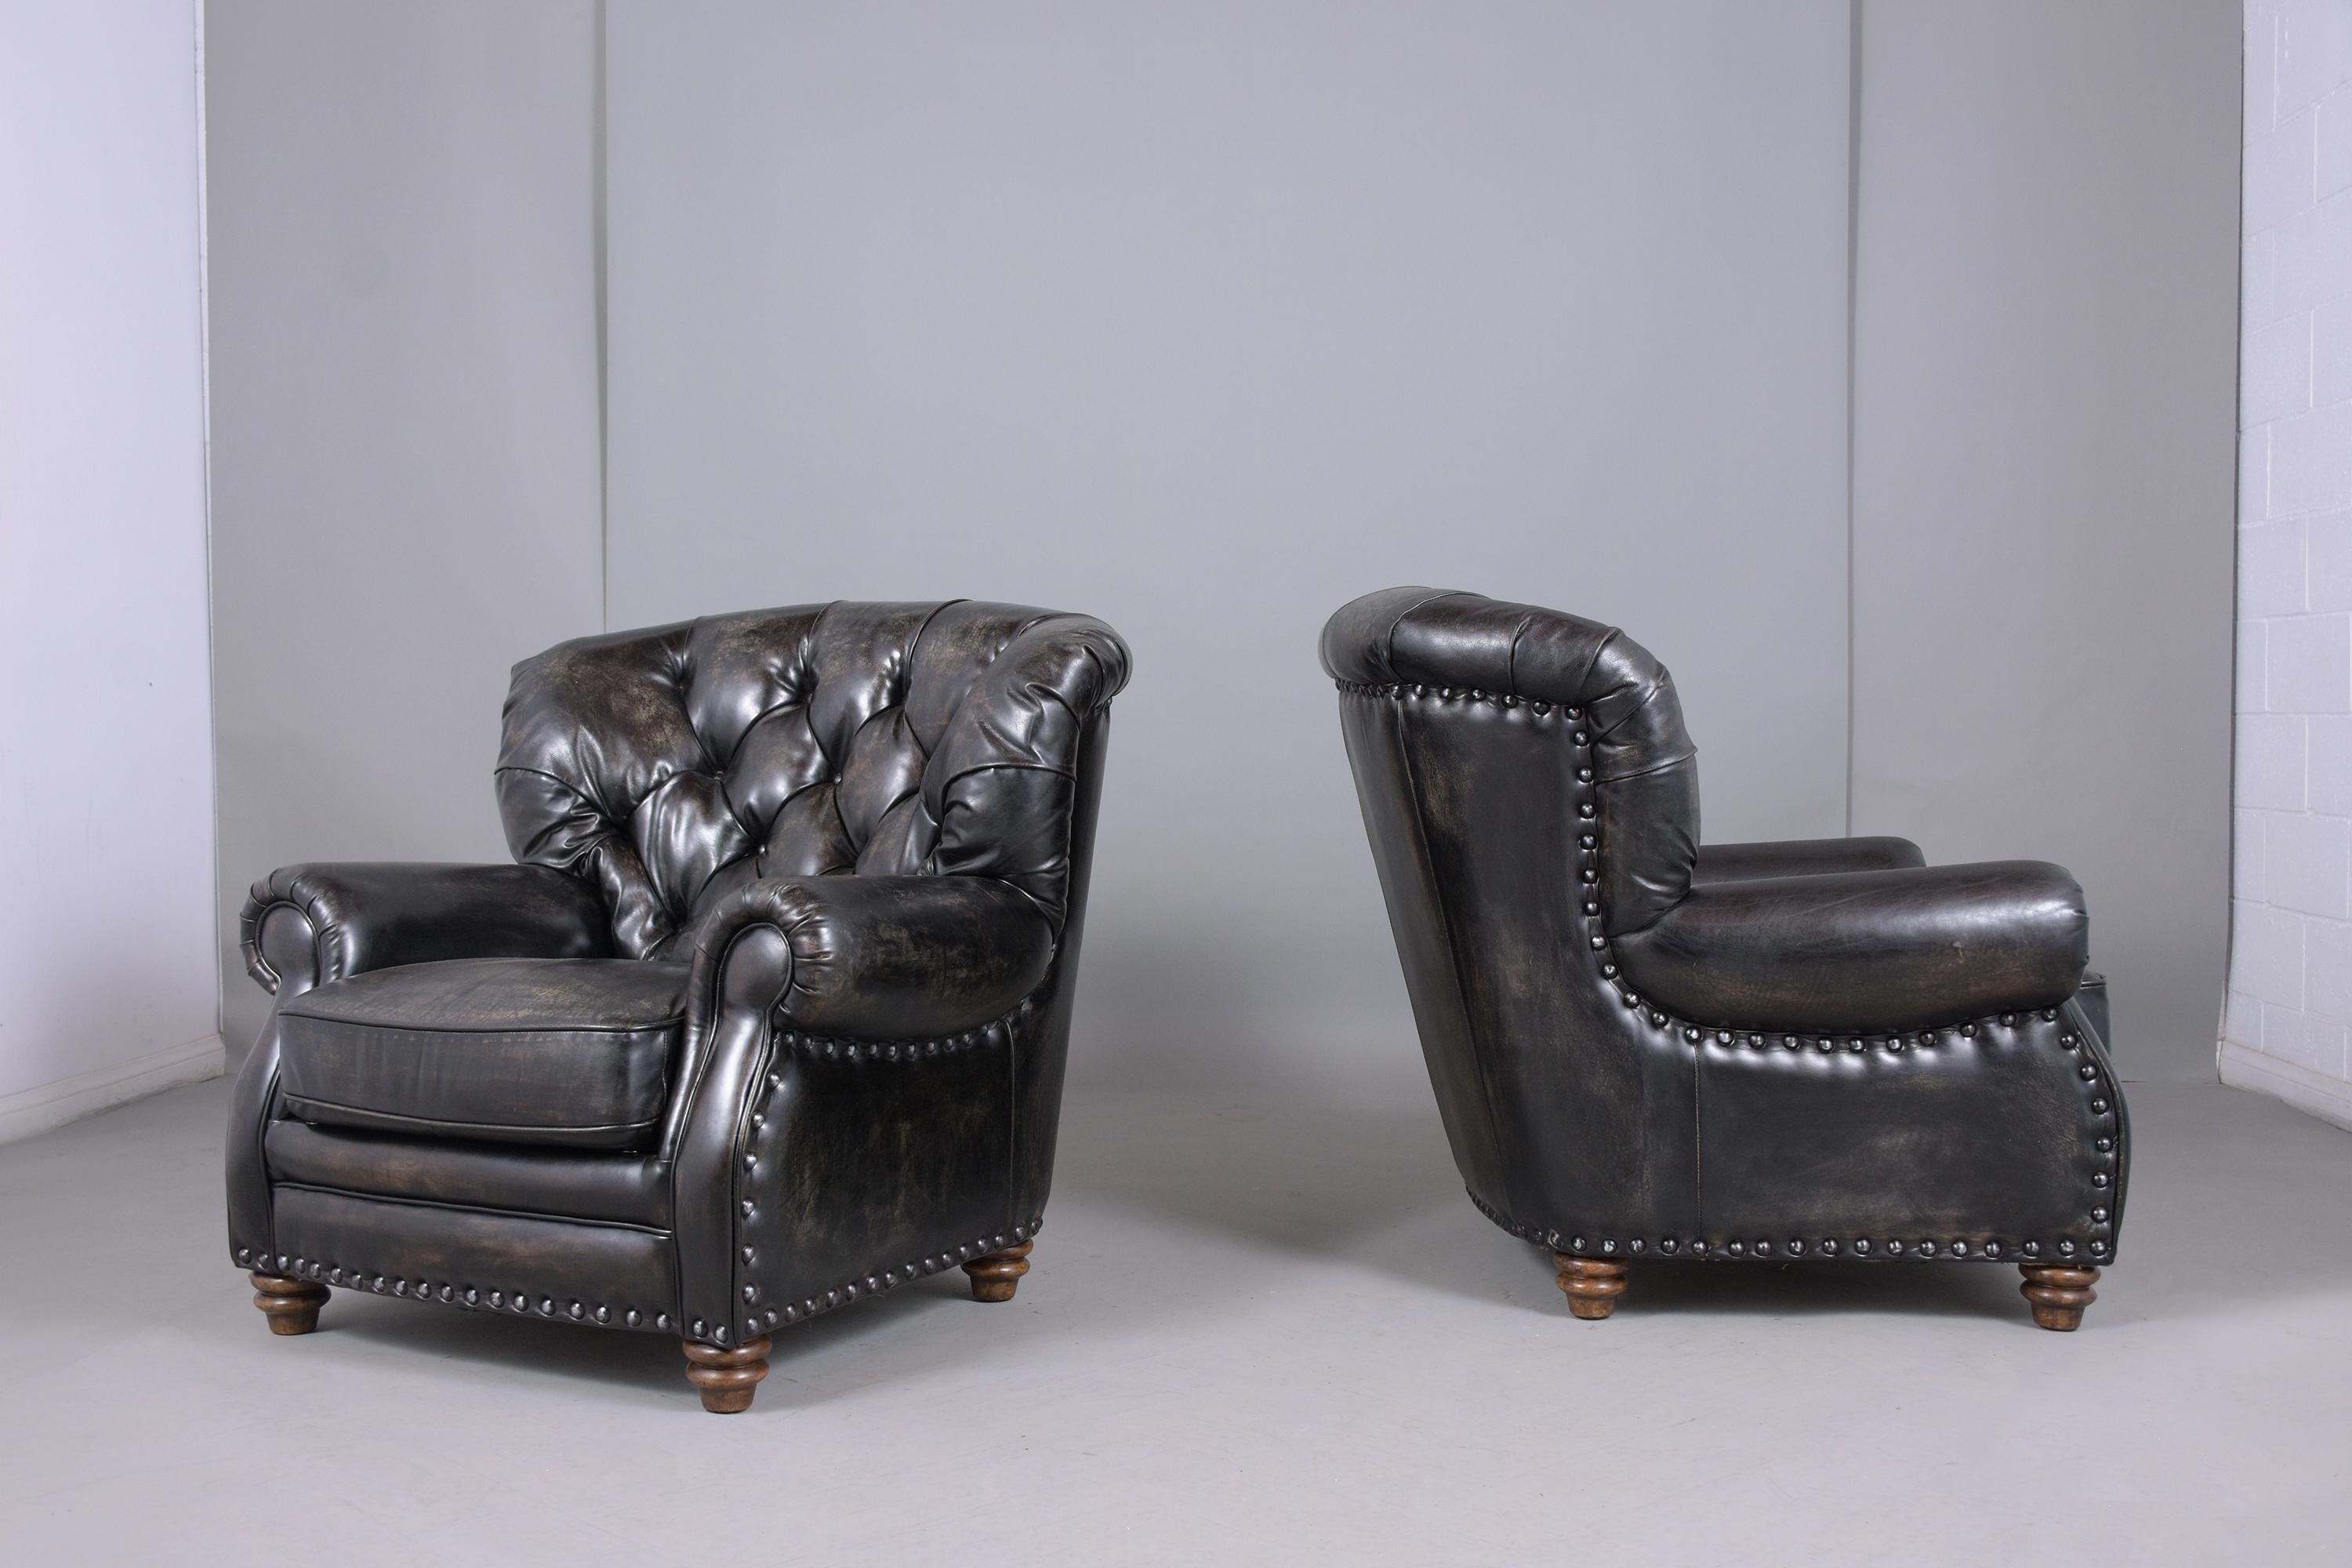 An extraordinary pair of vintage armchairs These lounge chairs are in great condition and features brass nailheads trim details leather upholstery with a tufted design, comfortable removable seat cushions, and these chairs are dyed in black color